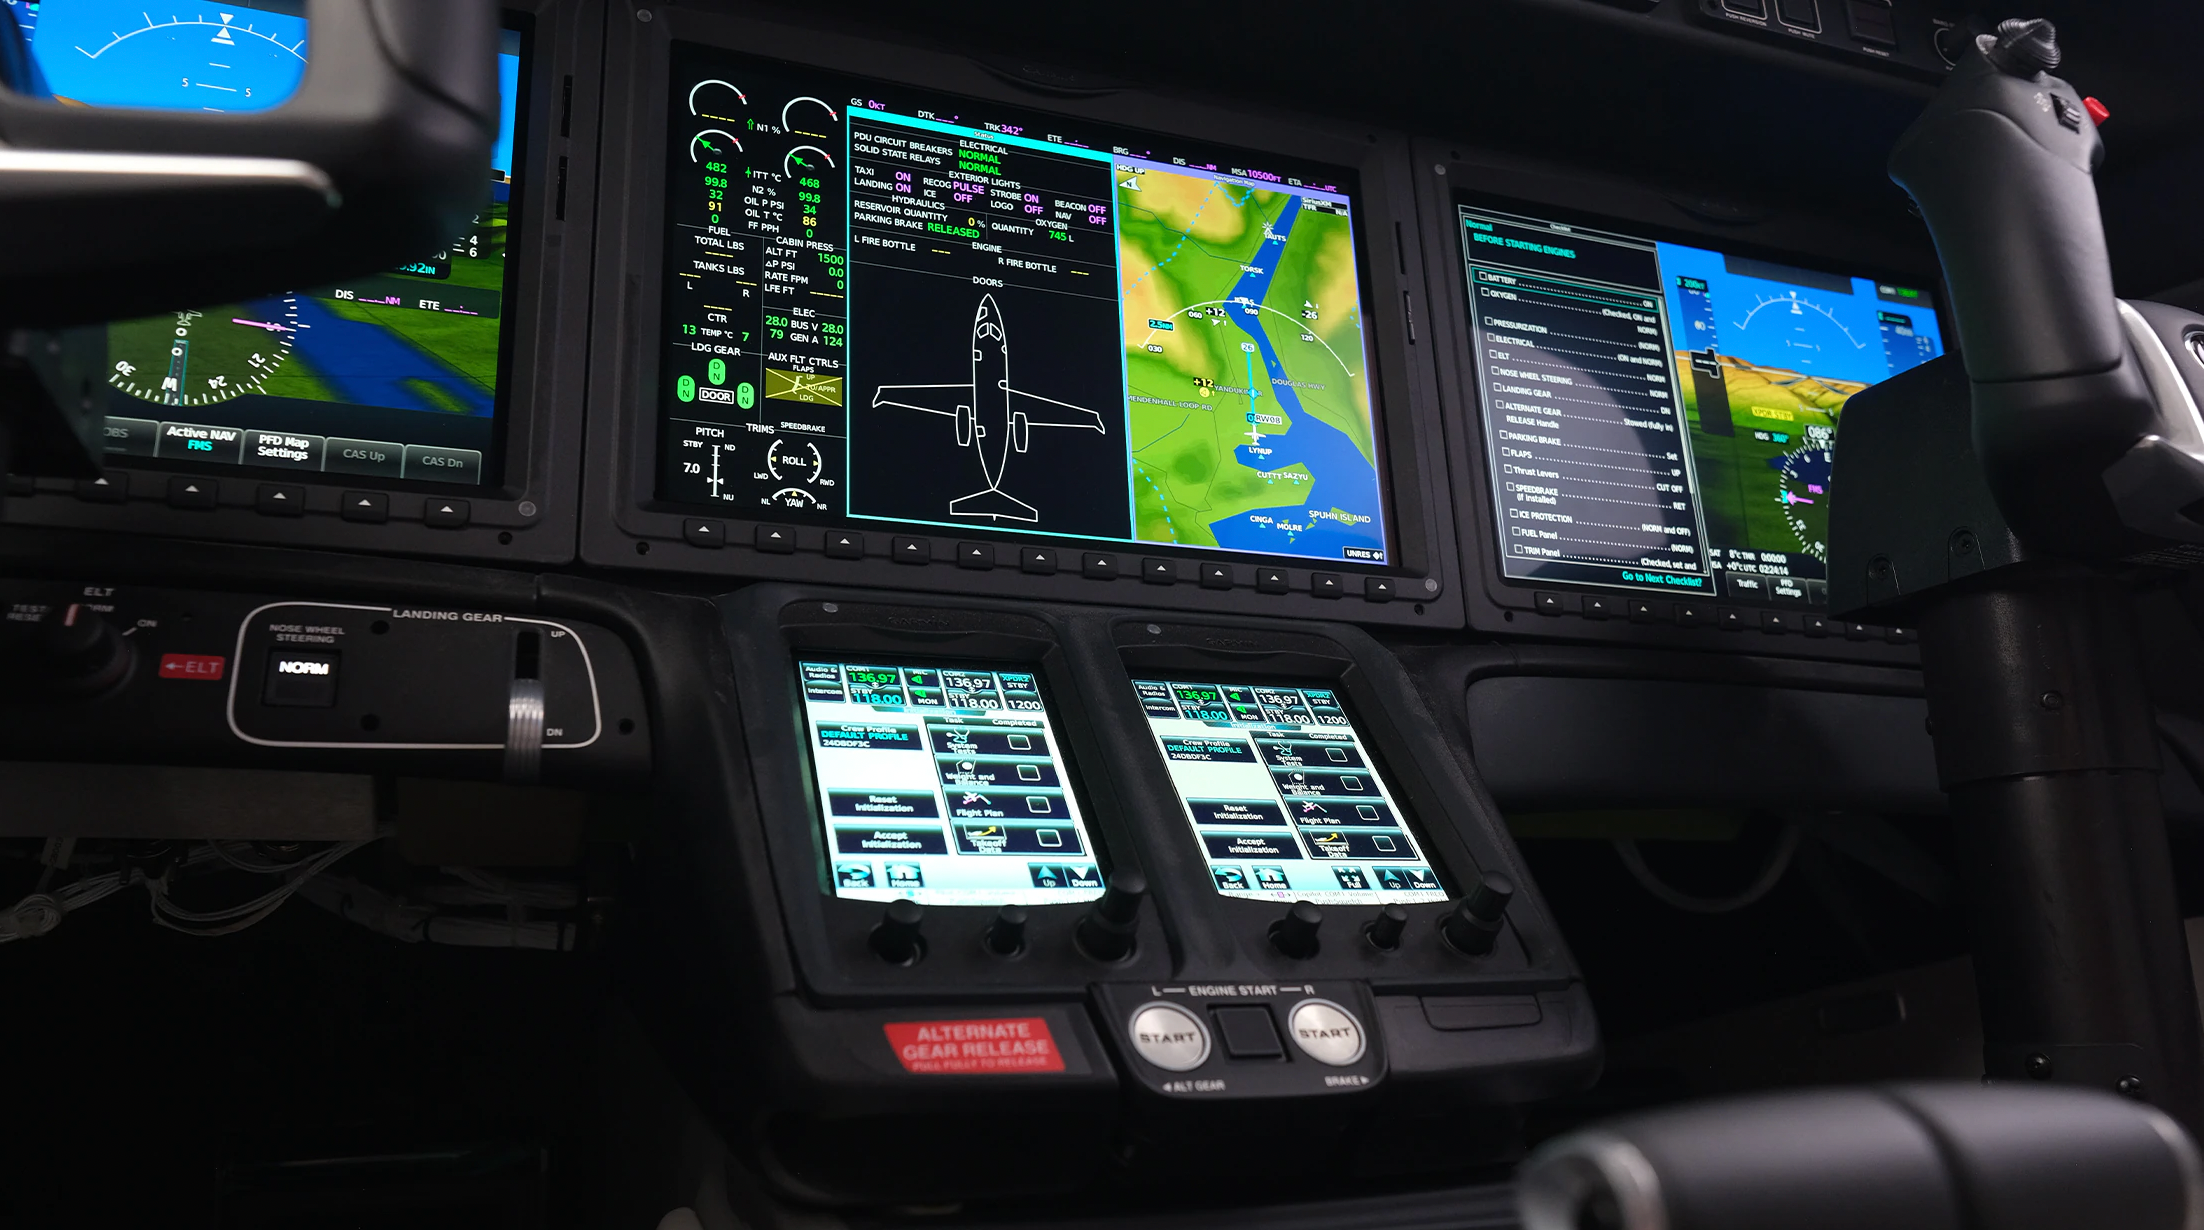 A closeup image of the displays in the HondaJet 2600 Cockpit.